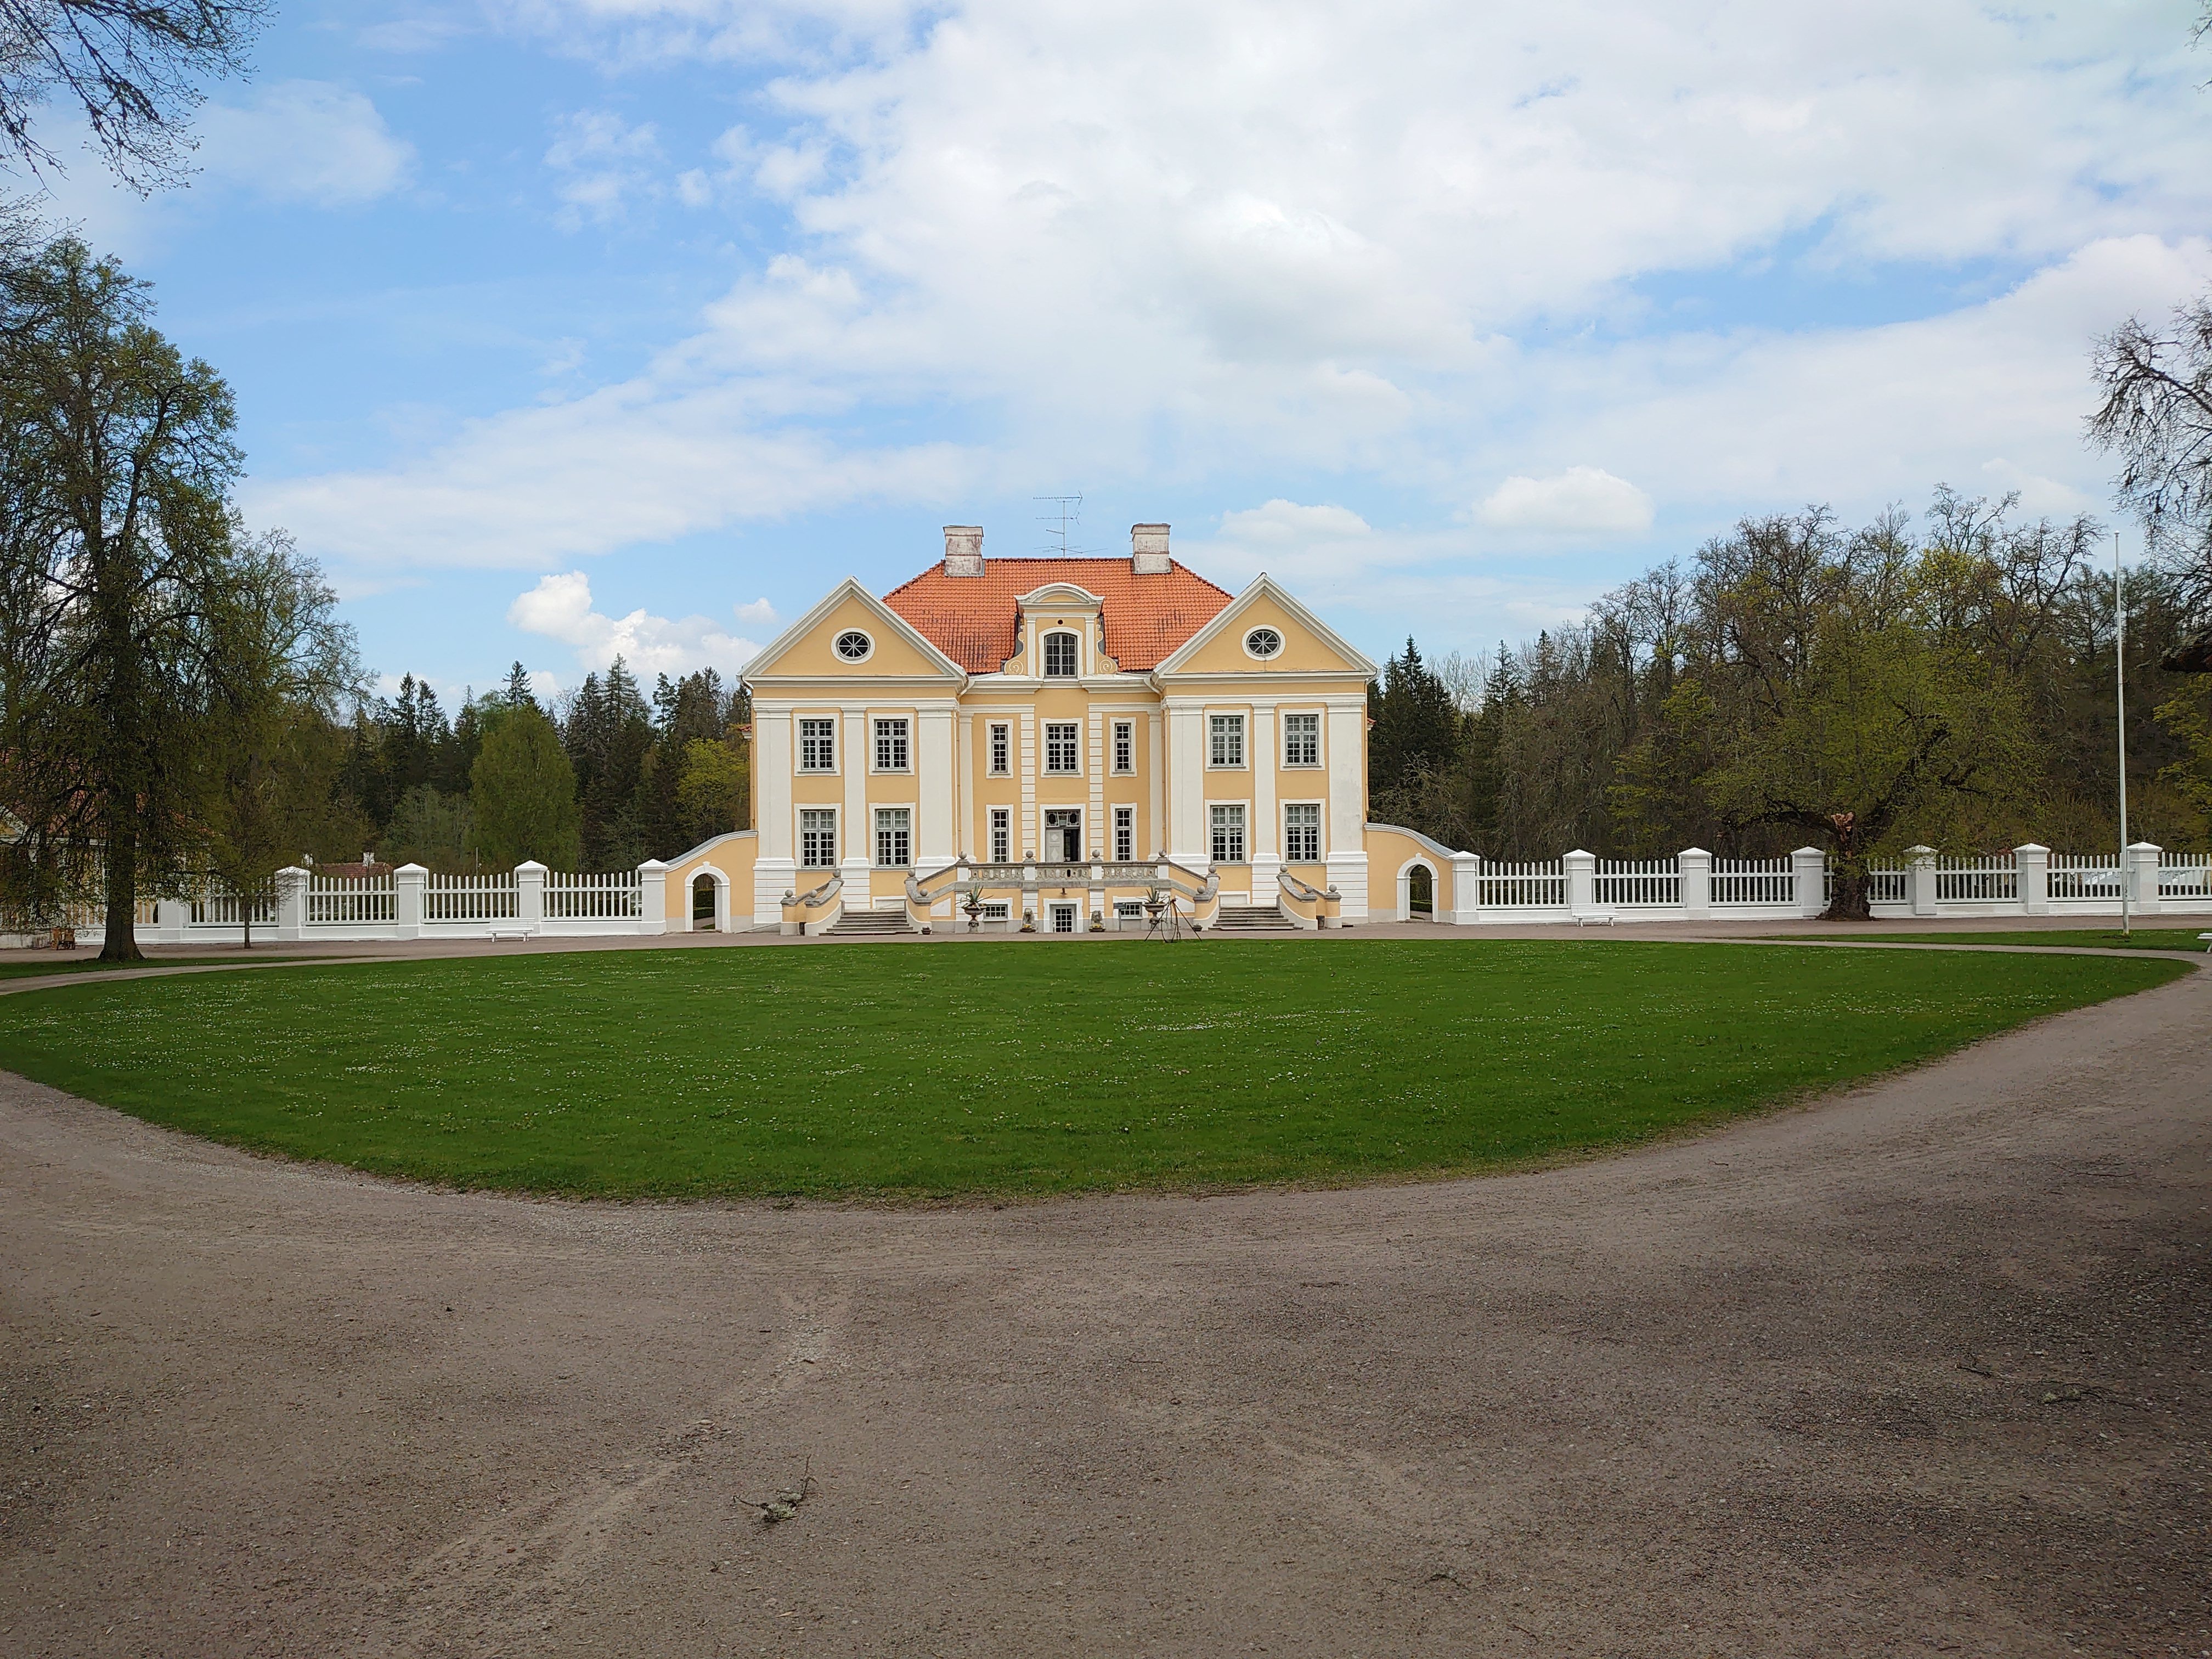 Palmse Manor's Gentleman House (the present appearance received 1782-85) rephoto